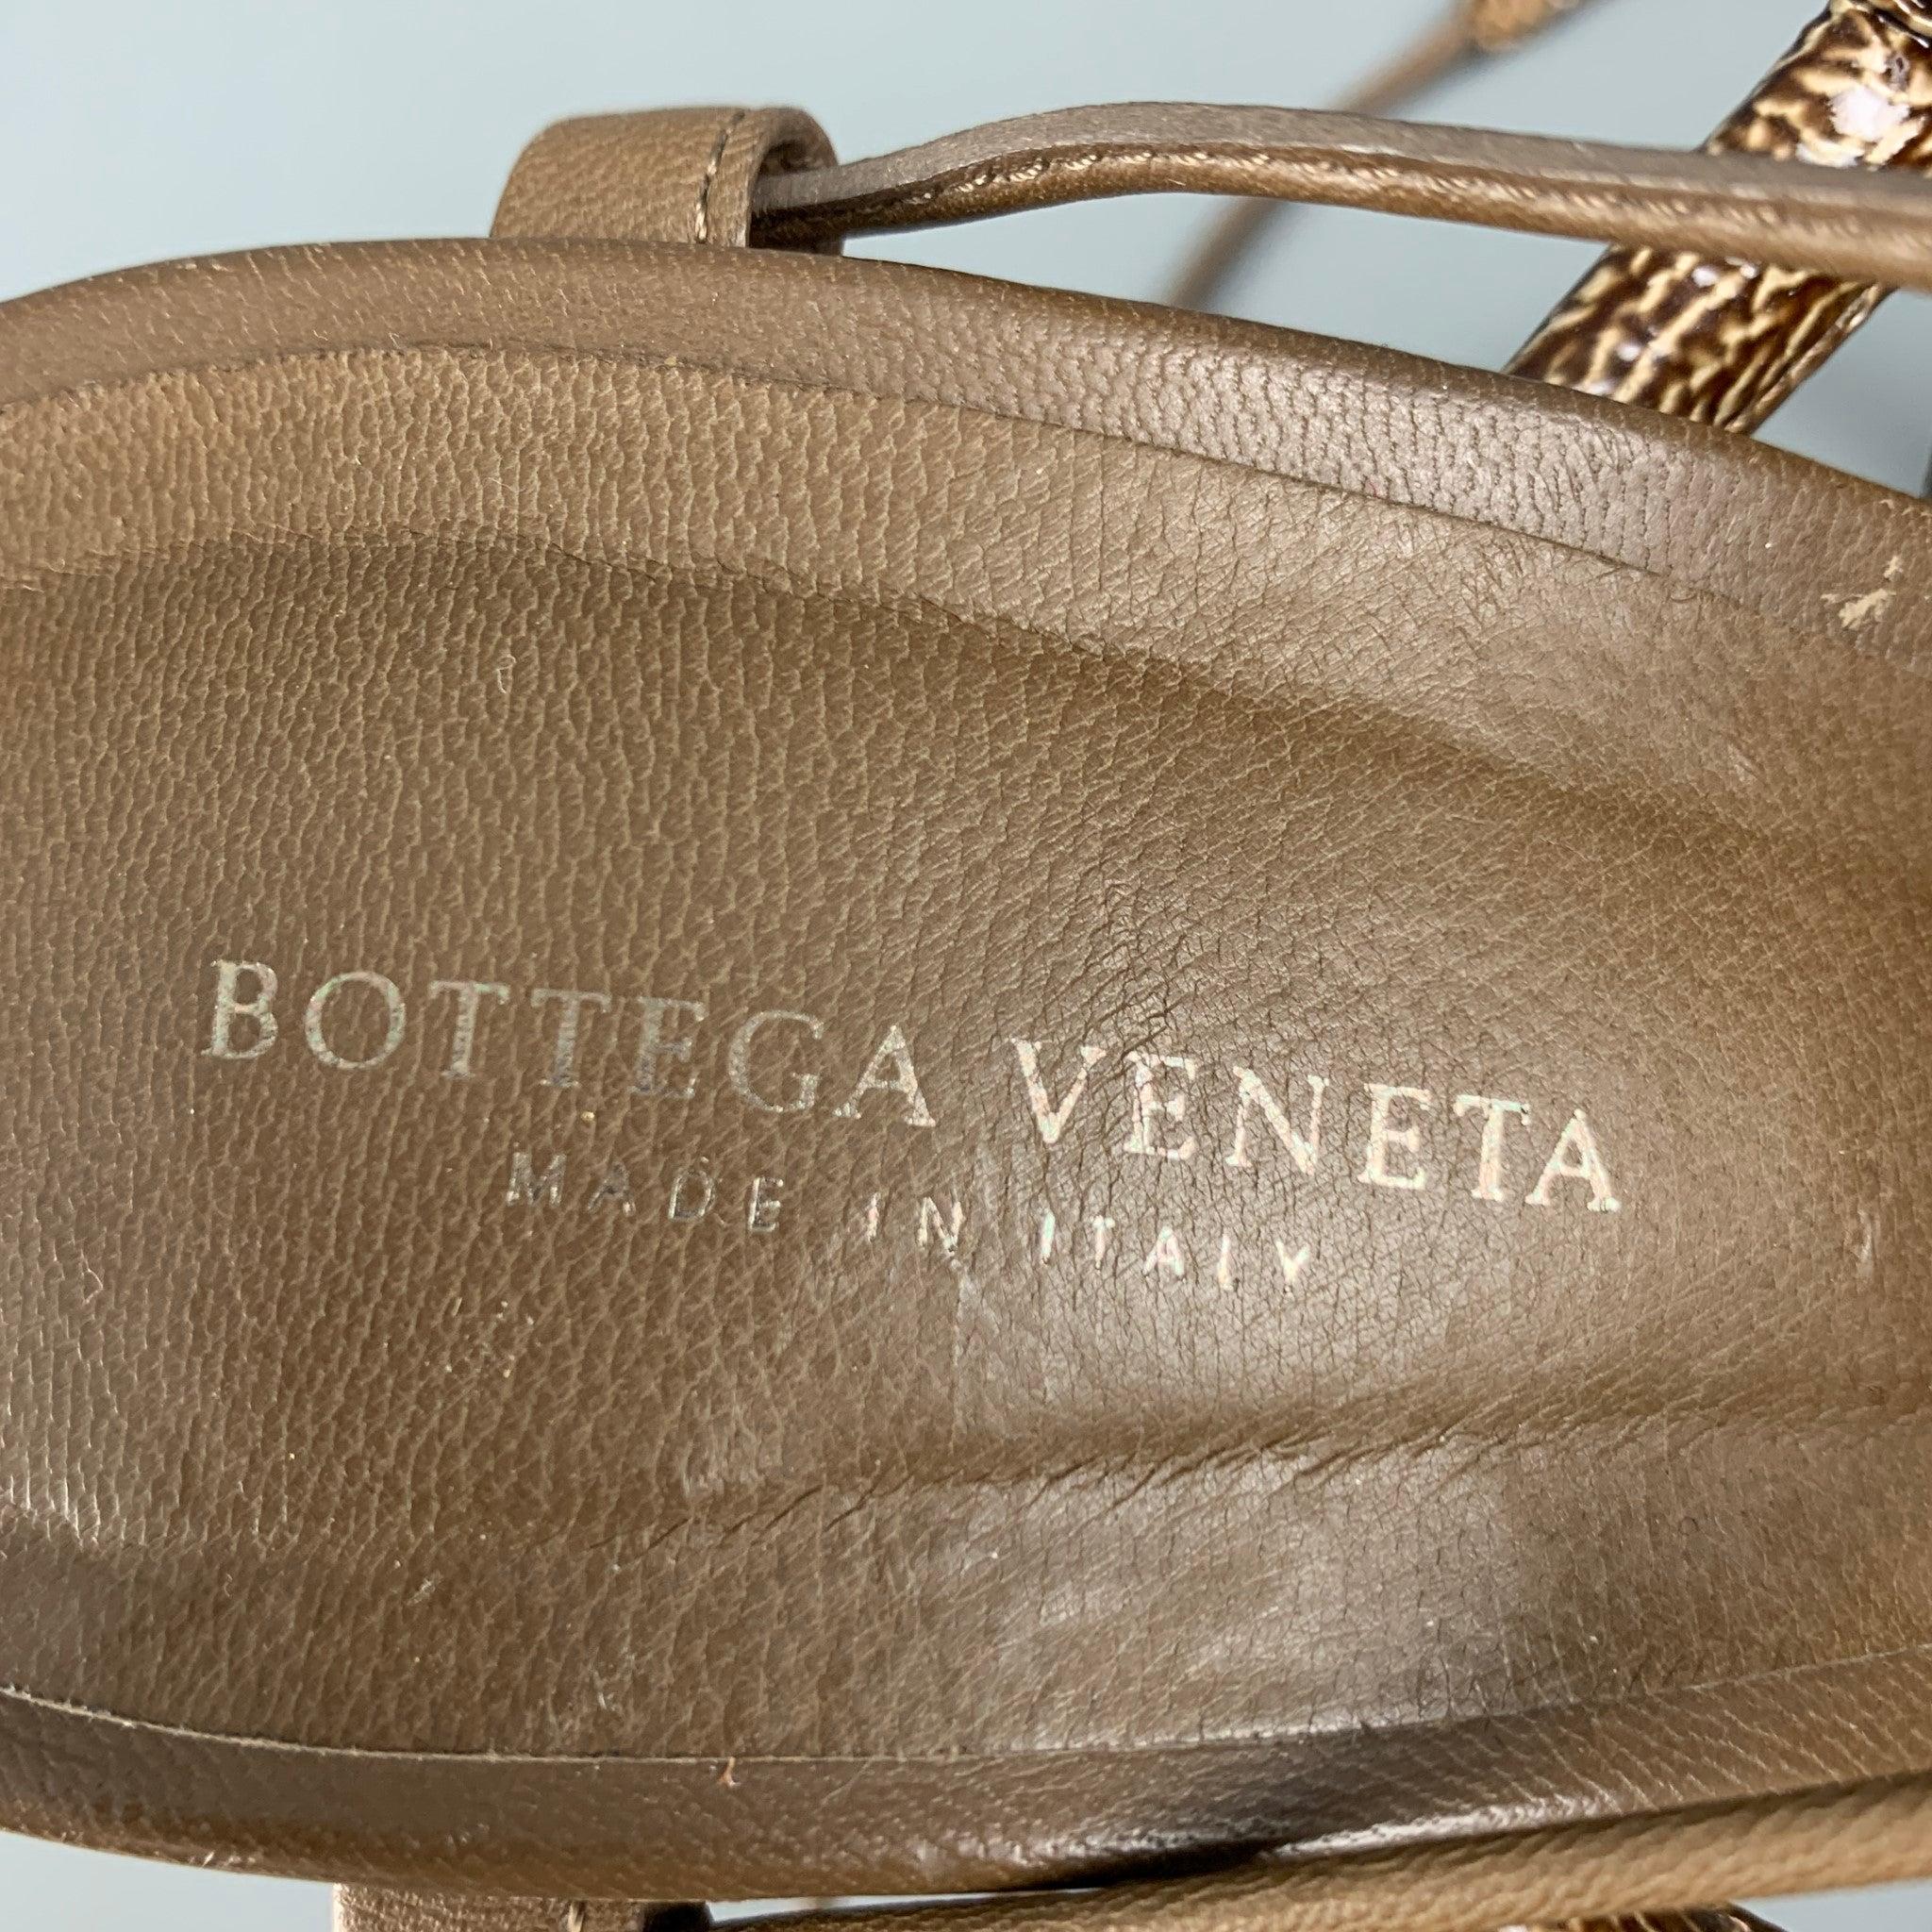 BOTTEGA VENETA Size 8.5 Brown Olive Woven Patent Leather Wedge Sandals For Sale 3